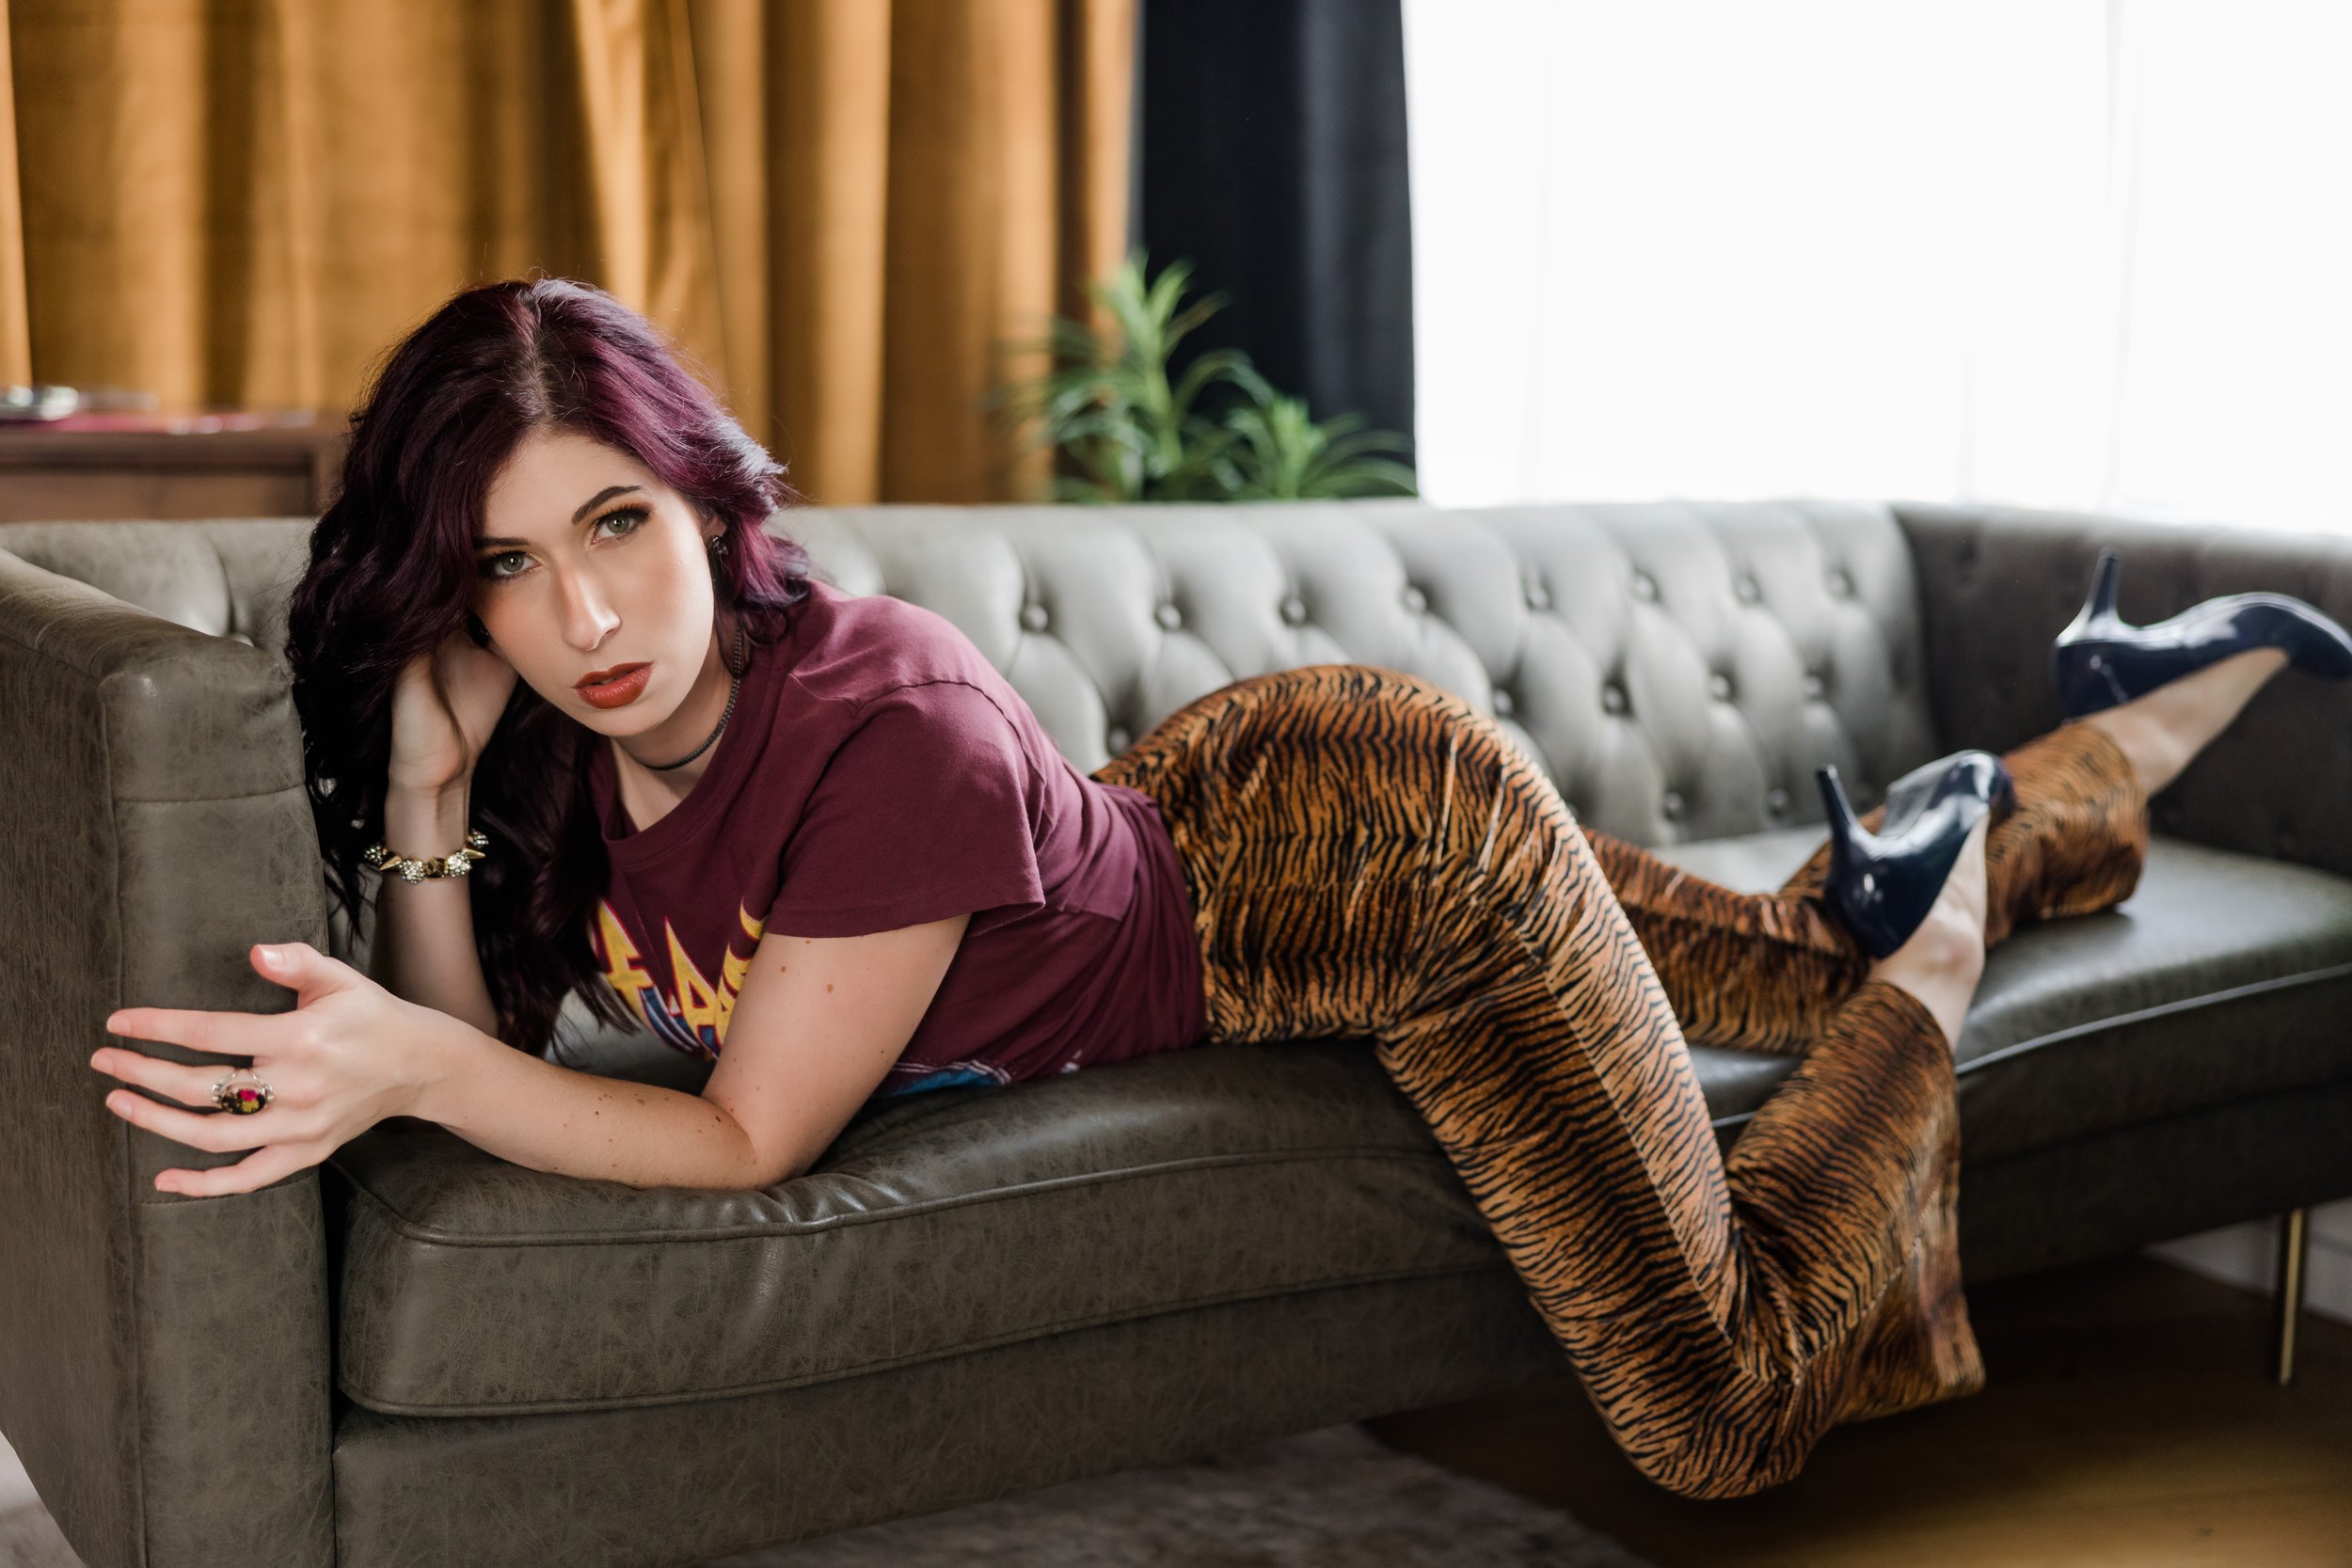 rock-n-roll-boudoir-photography-edgy-couch-pose